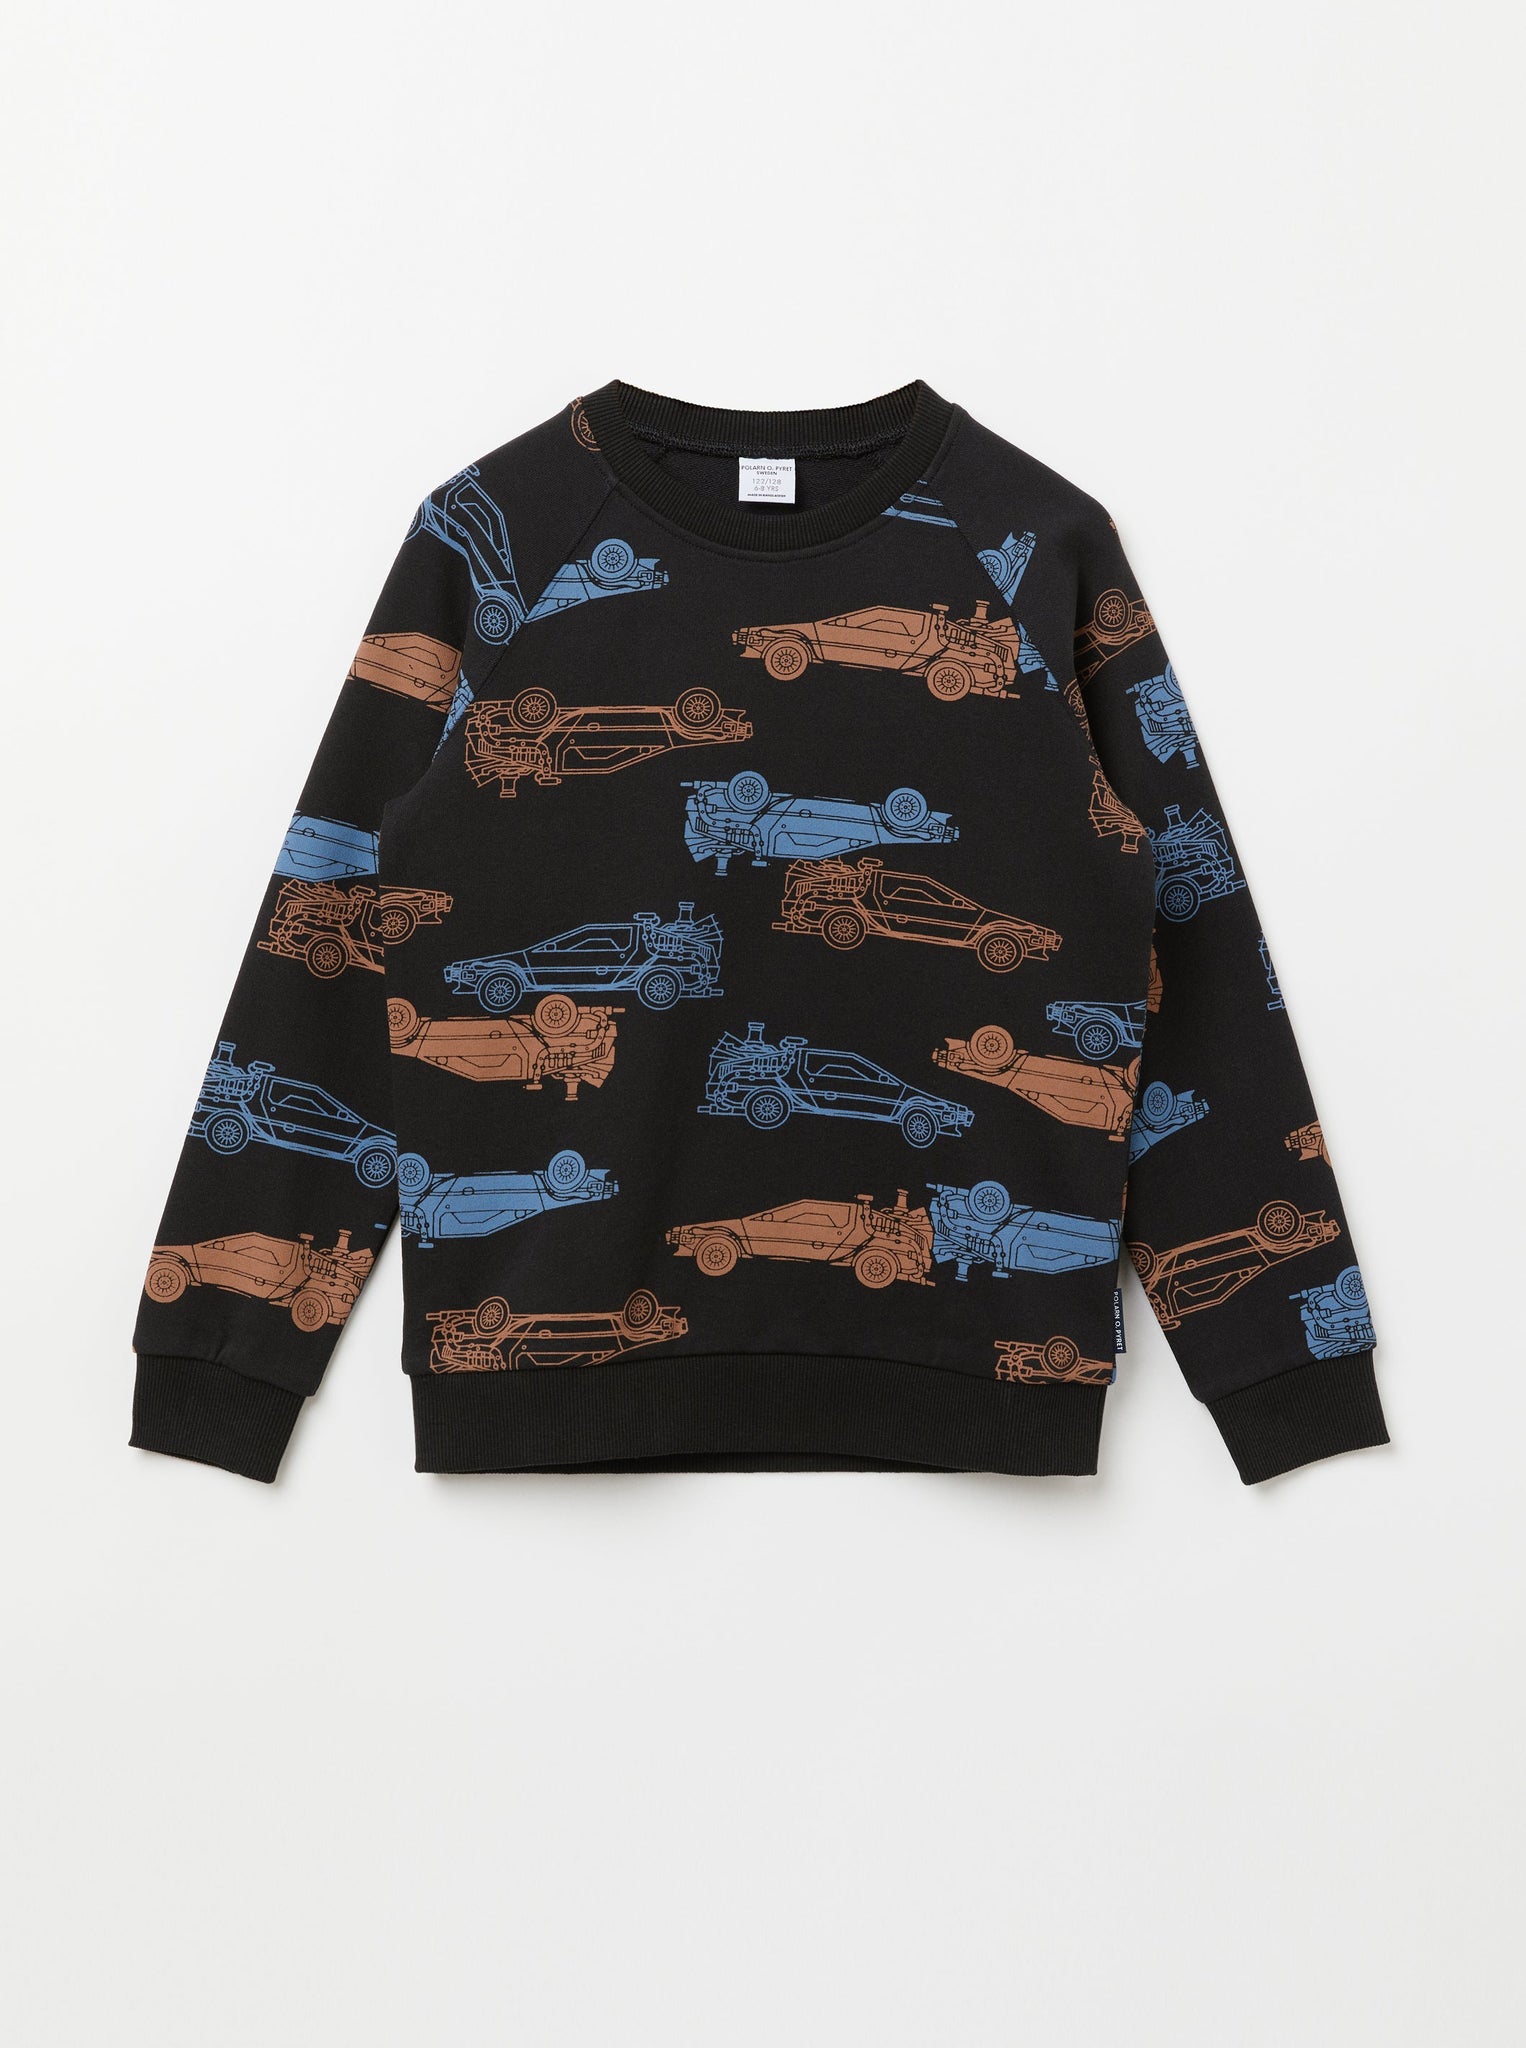 Organic Cotton Kids Car Sweatshirt from the Polarn O. Pyret Kidswear collection. Nordic kids clothes made from sustainable sources.